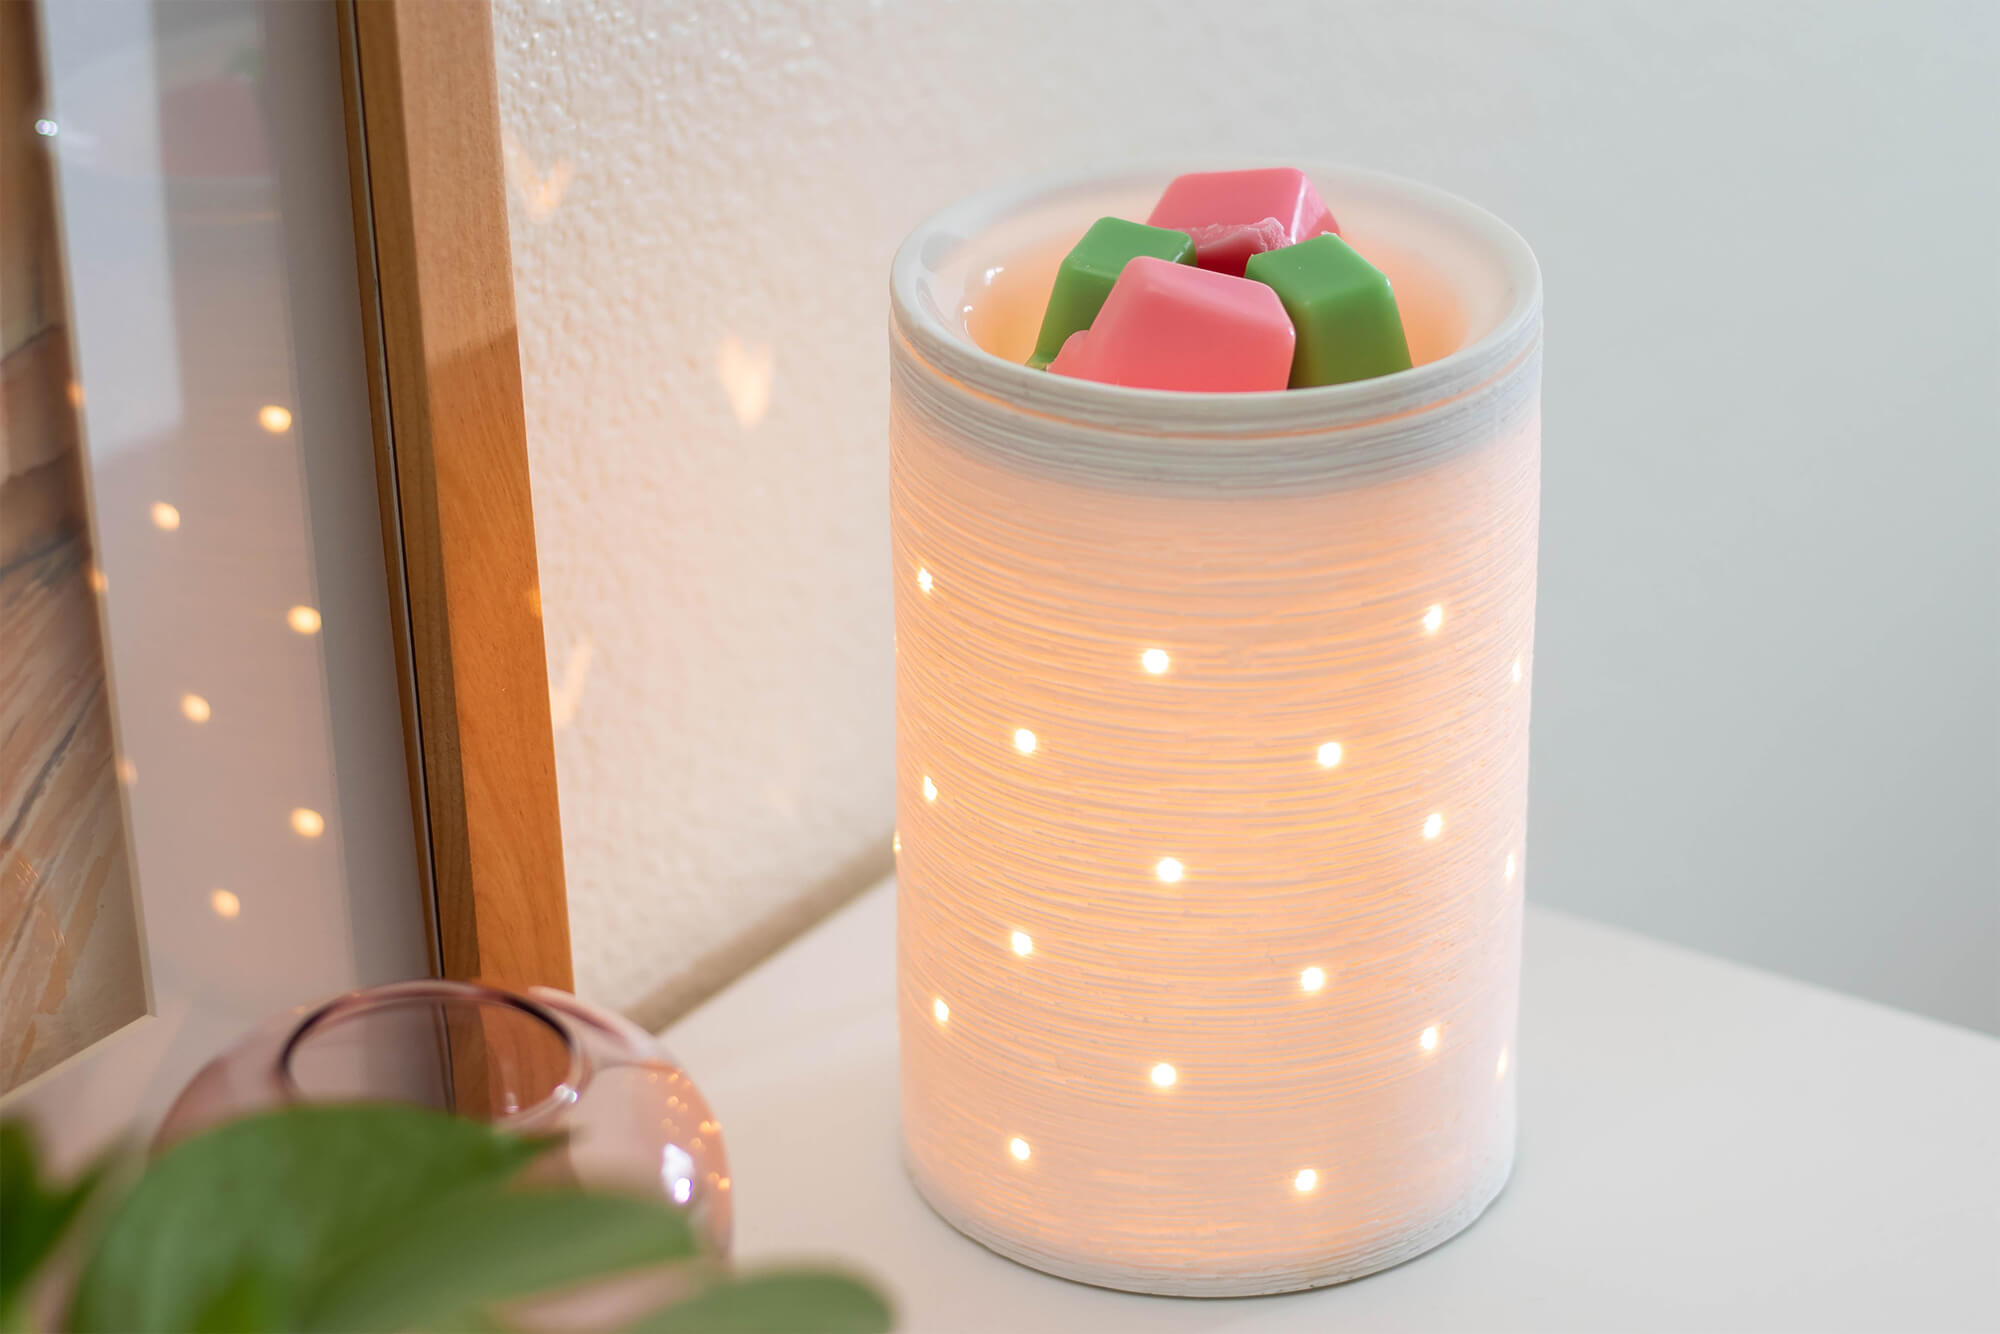 How to create your own Scentsy fragrances